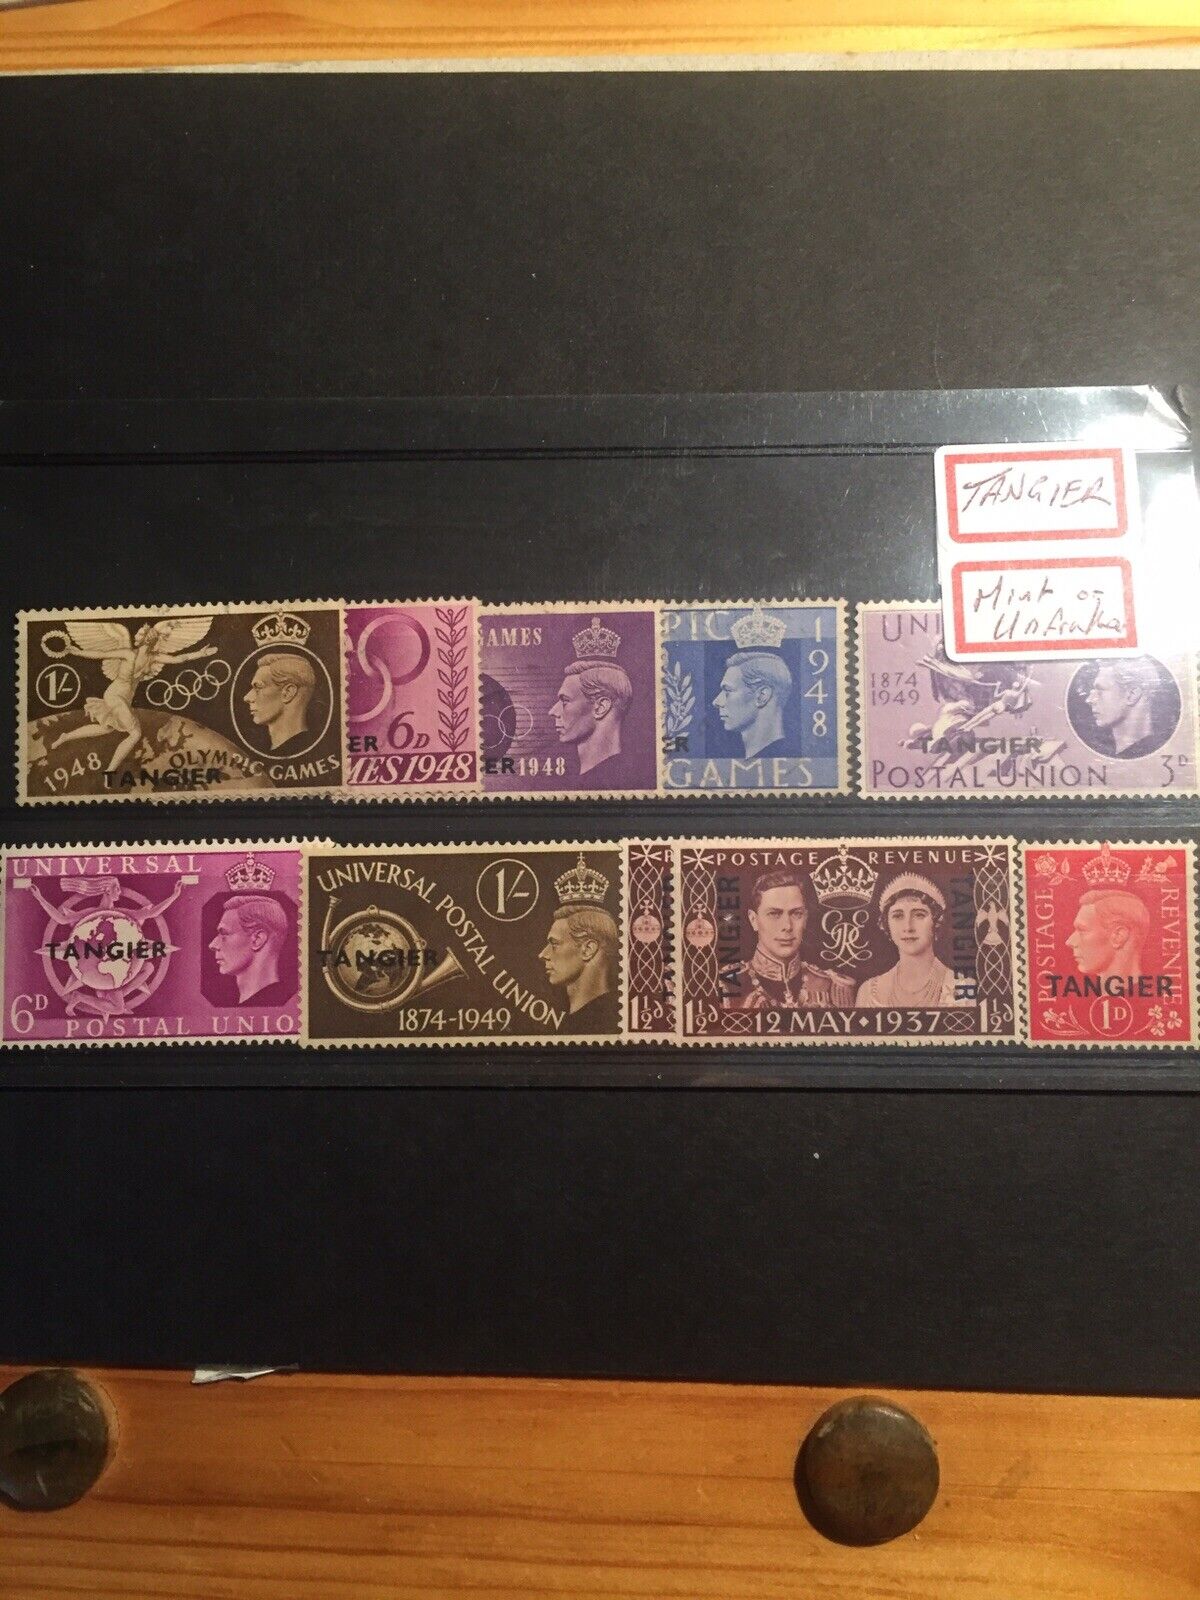 KGVI JOB LOT MINT STAMPS as pictures